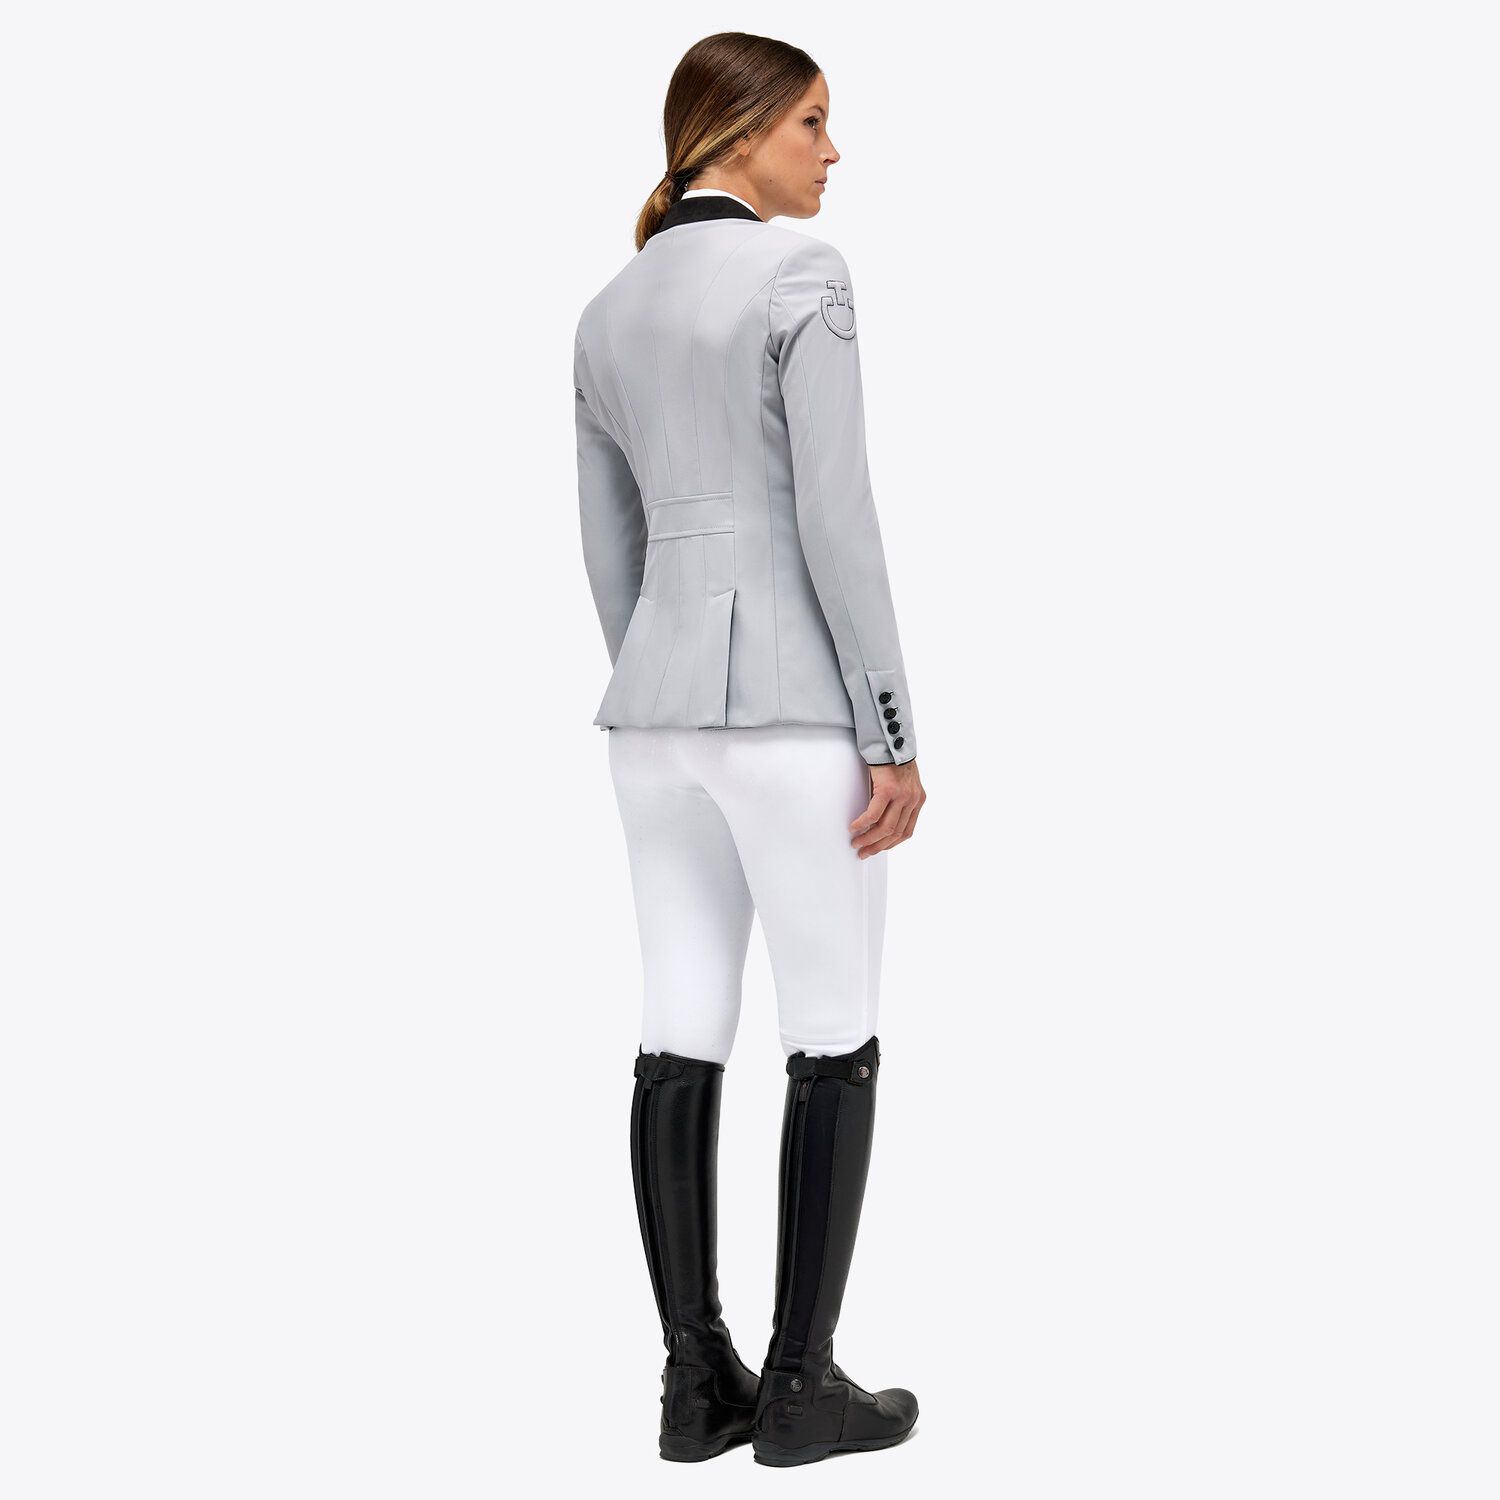 Cavalleria Toscana Women's competition riding jacket. LIGHT GREY-4